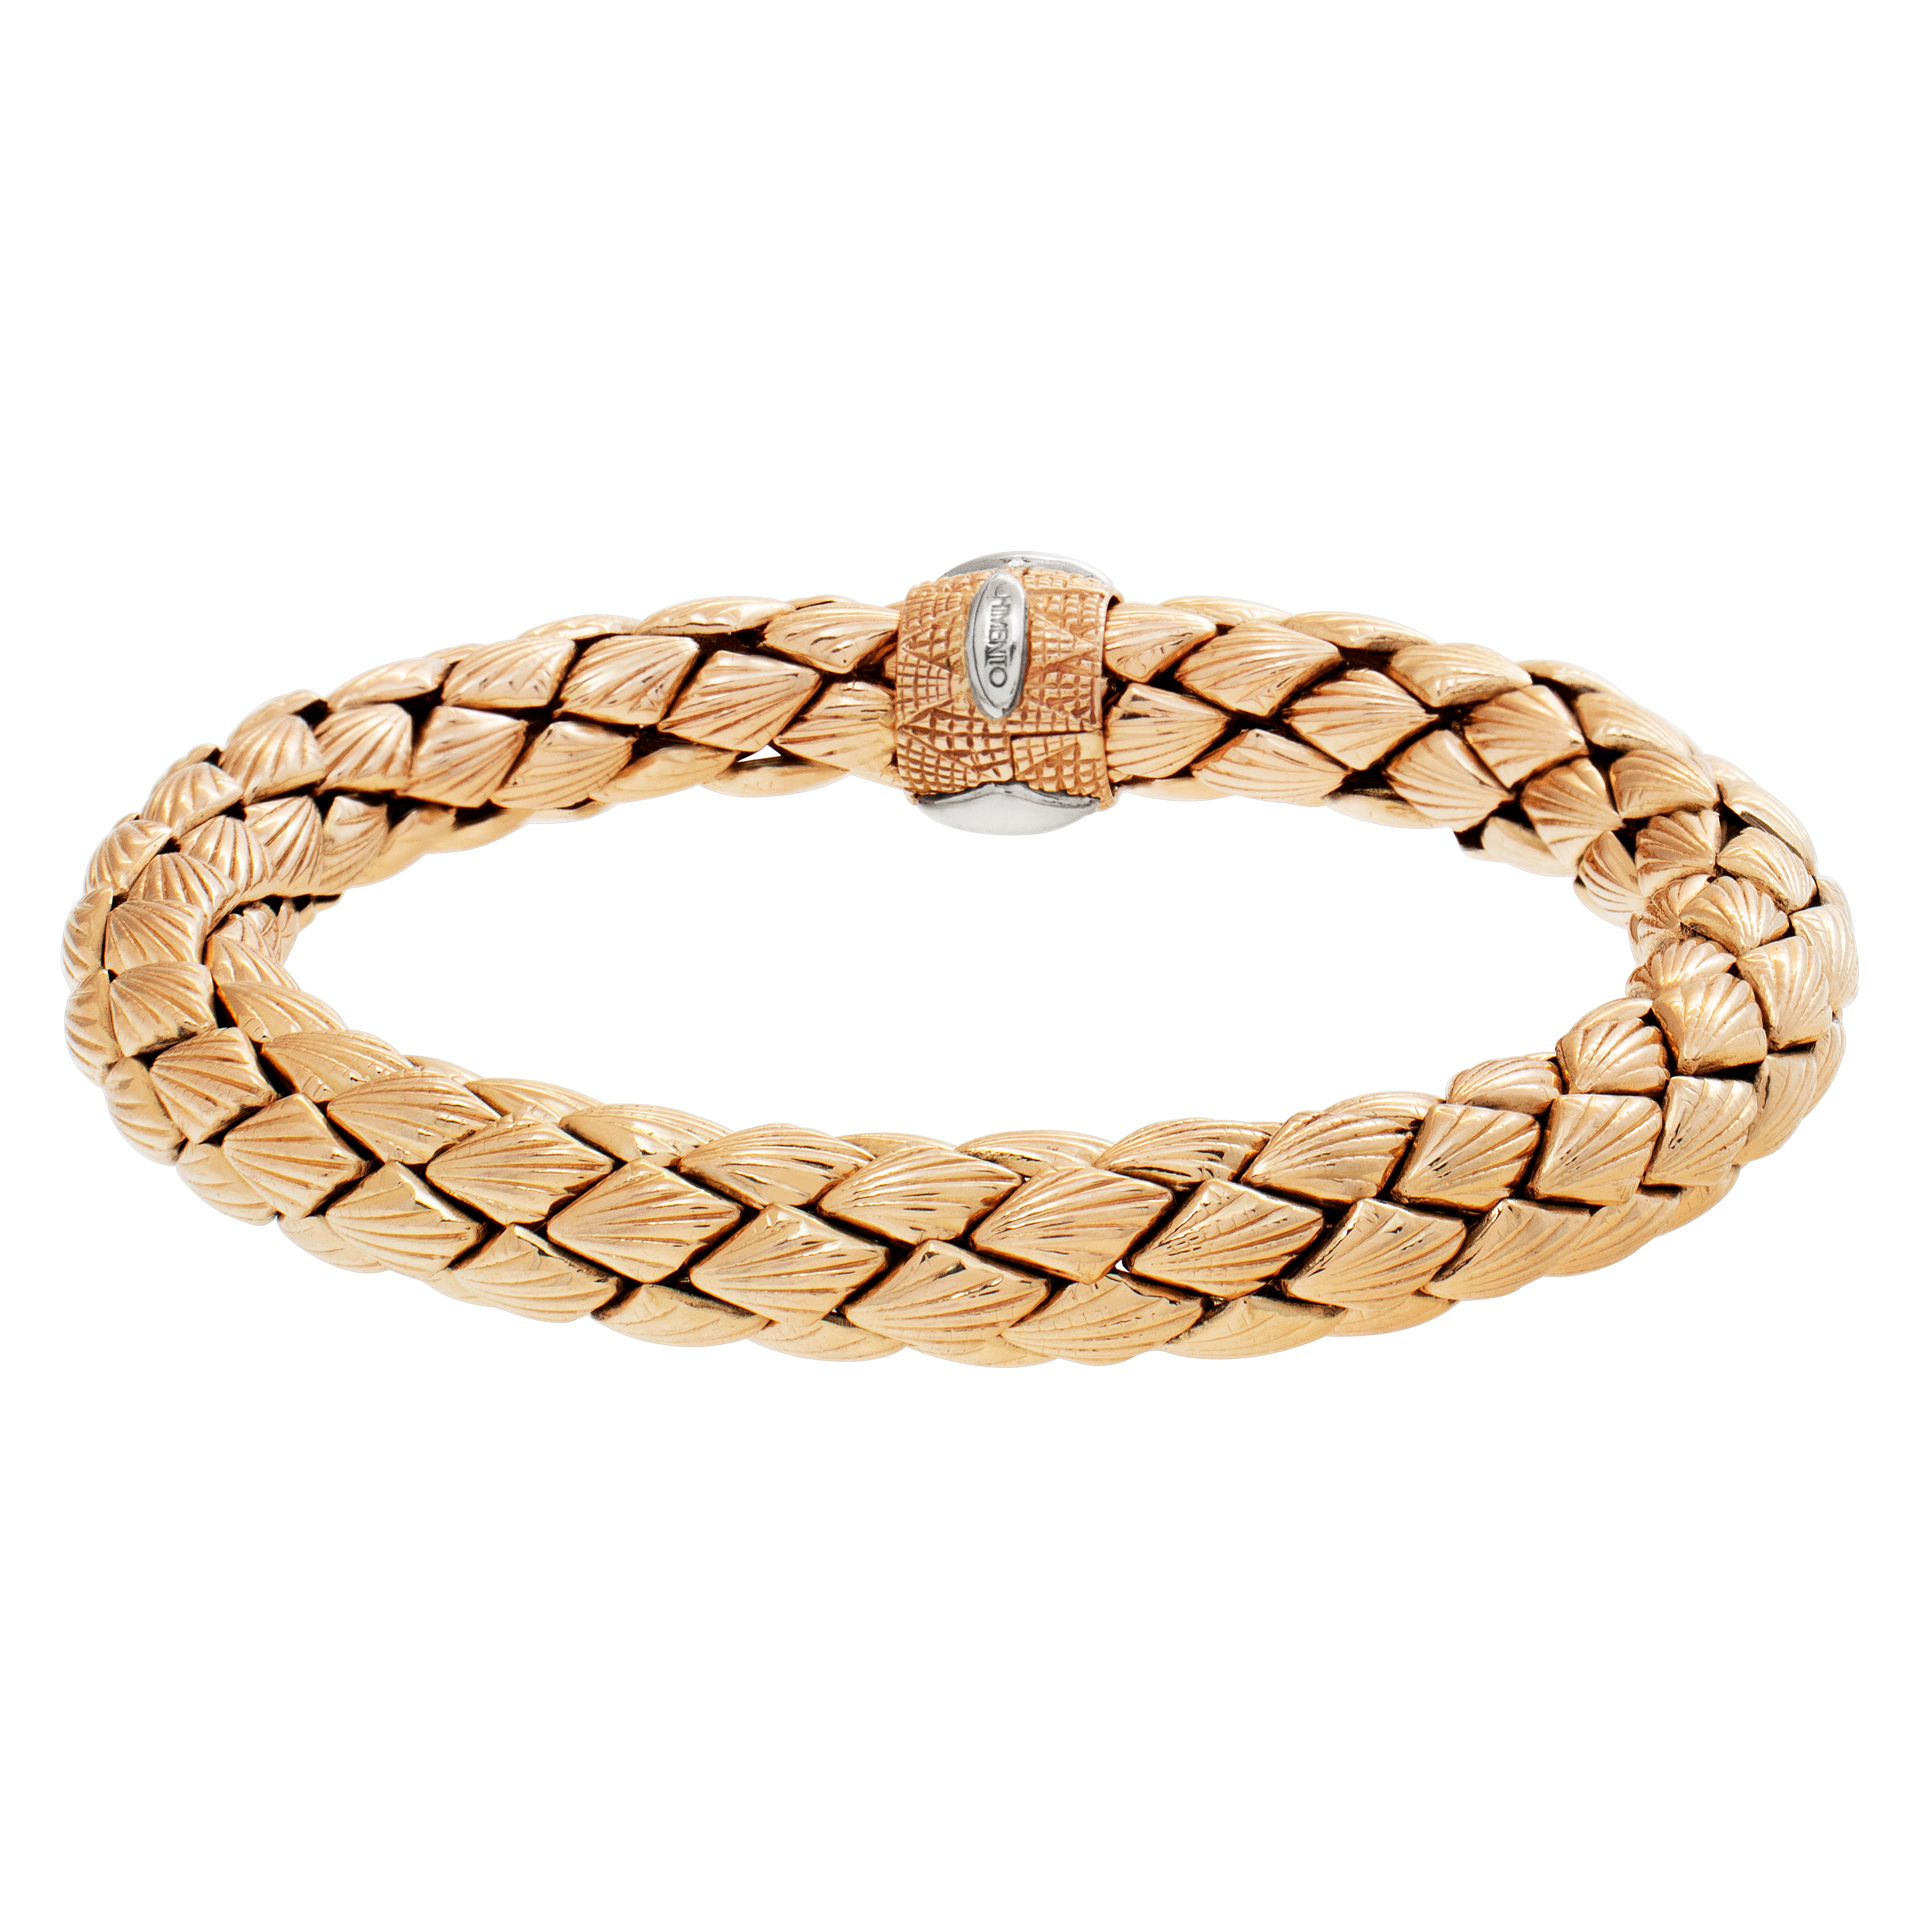 Chimento breaded bracelet in 18k rose gold with diamond accent on the clasp